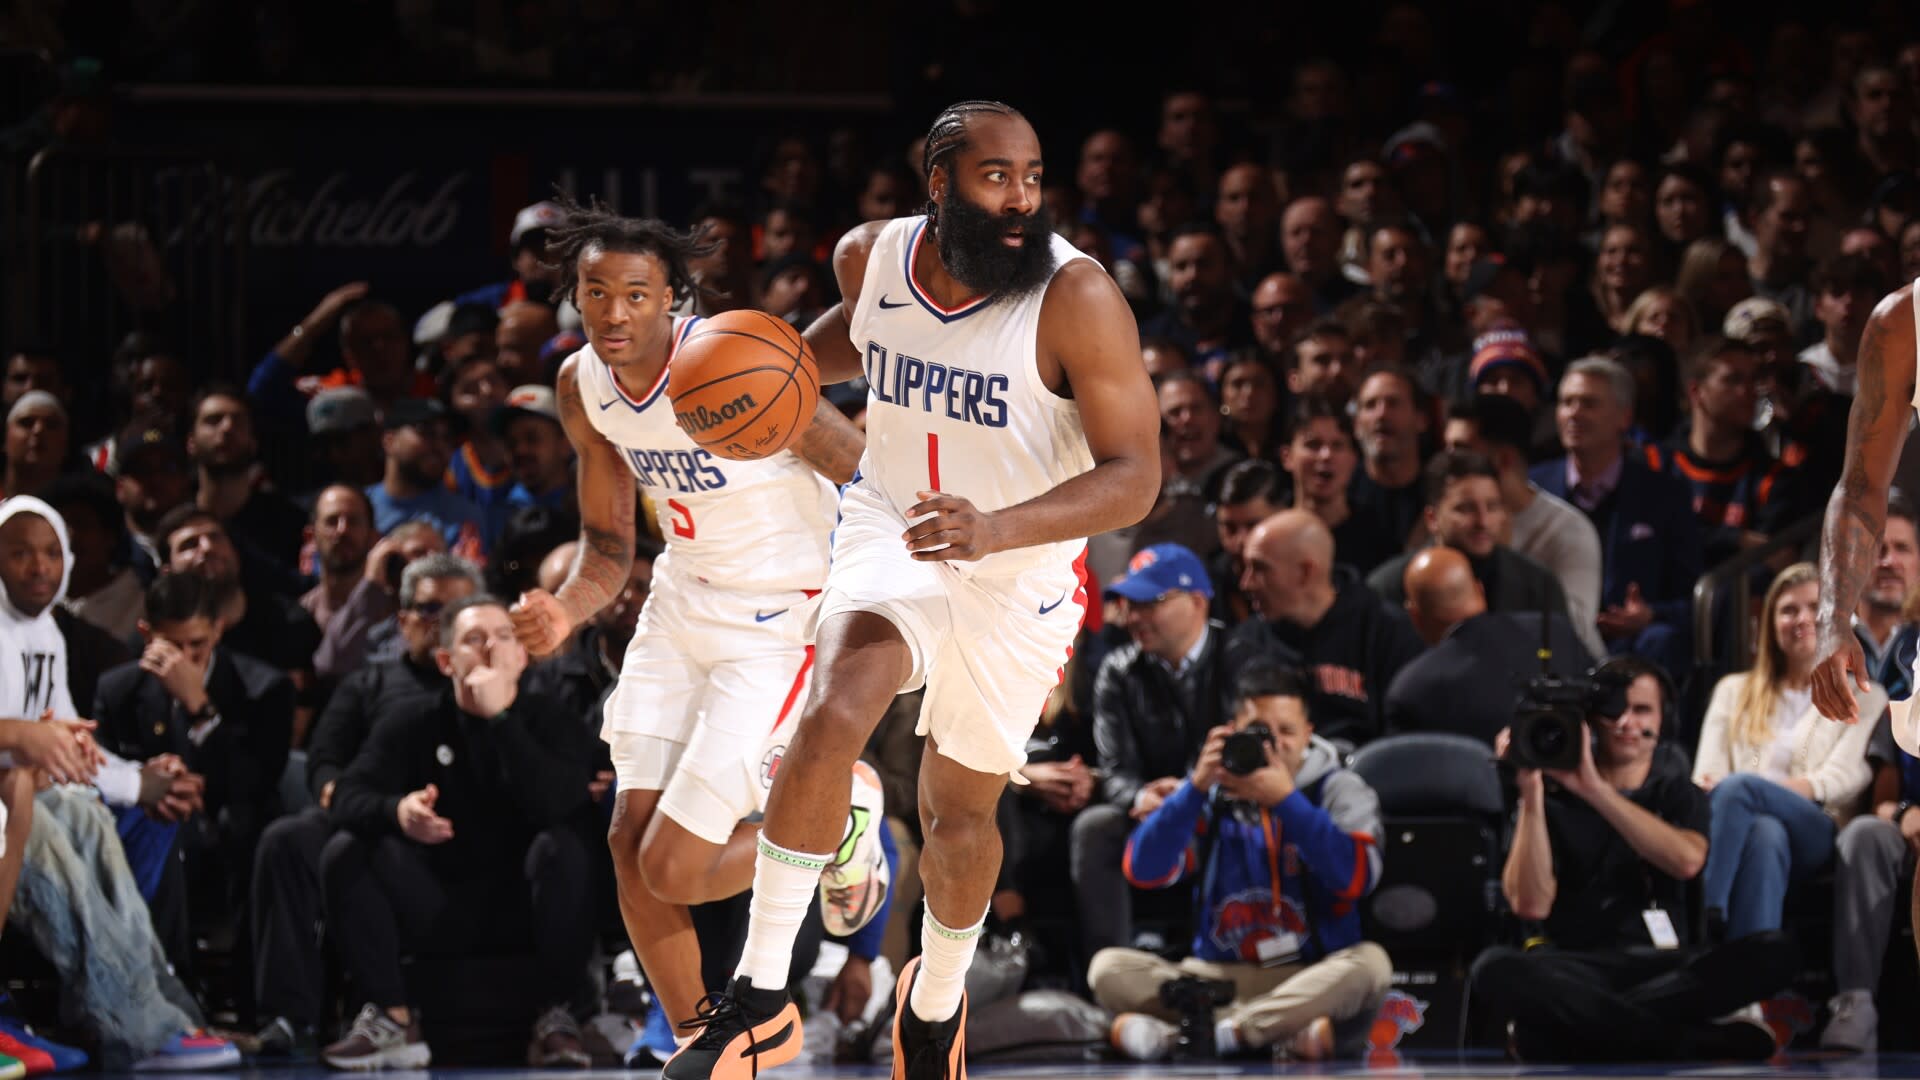 James Harden scores 17, looks solid in Clippers debut, but team does not in loss to Knicks